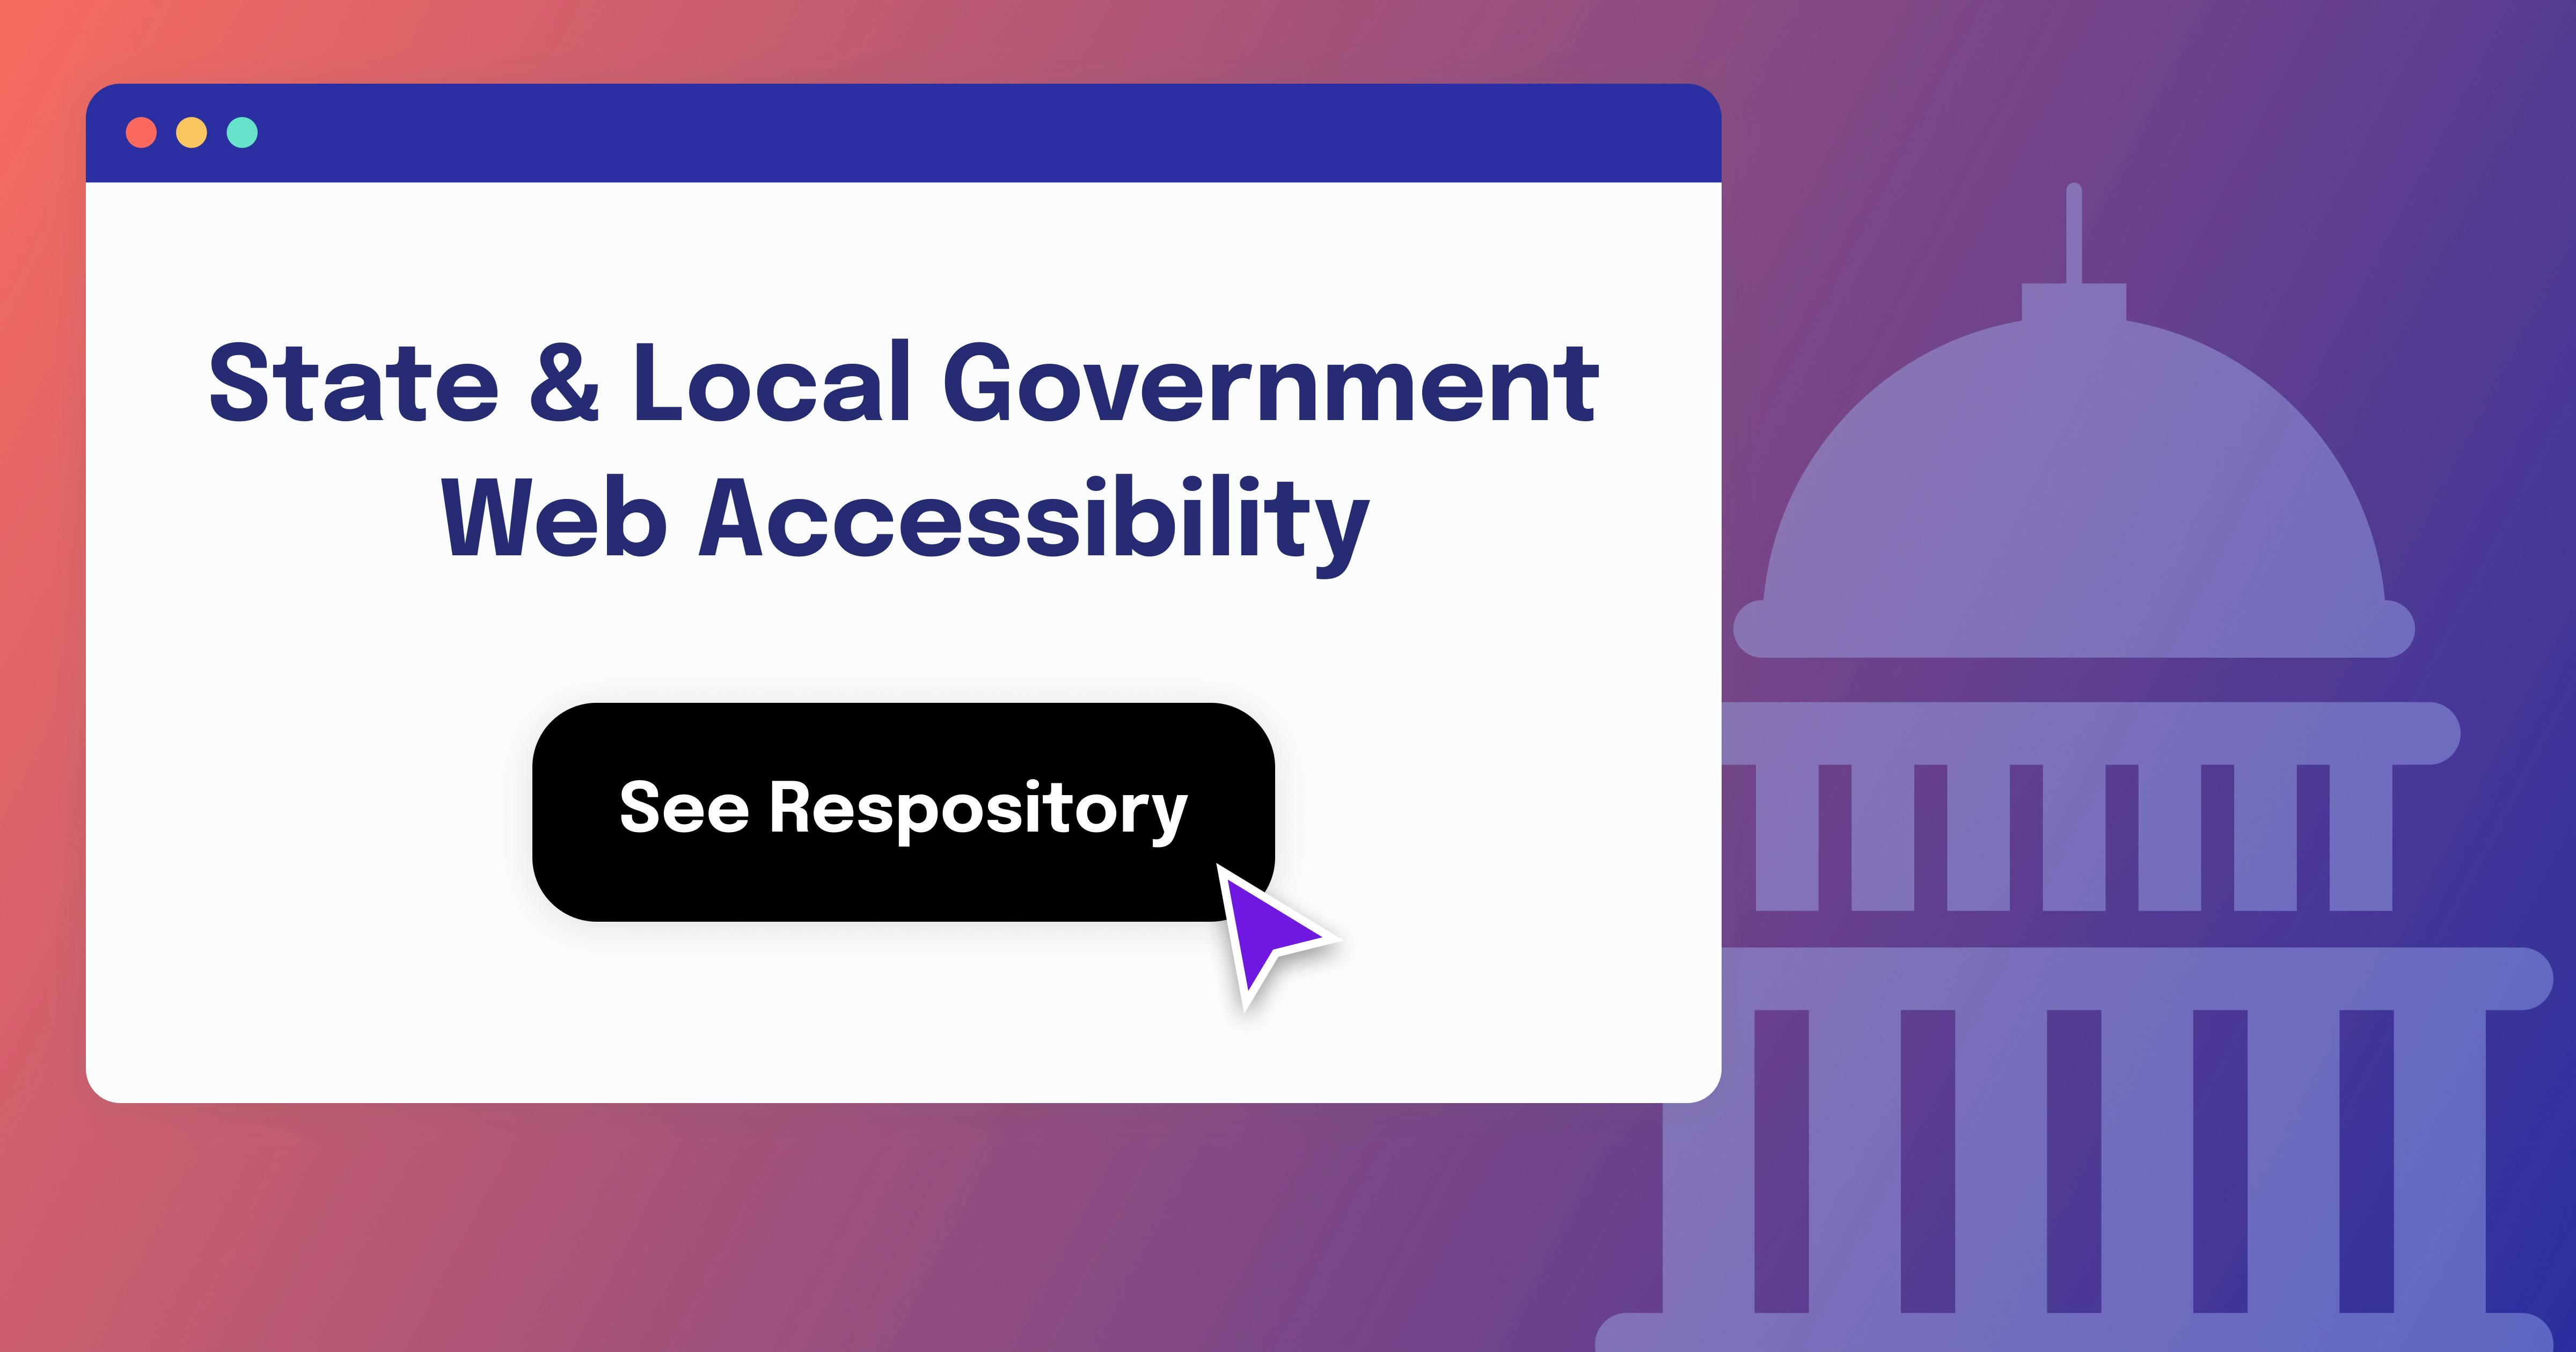 Web browser with a State and Local Government Web Accessibility heading and a button to See Repository with a cursor.